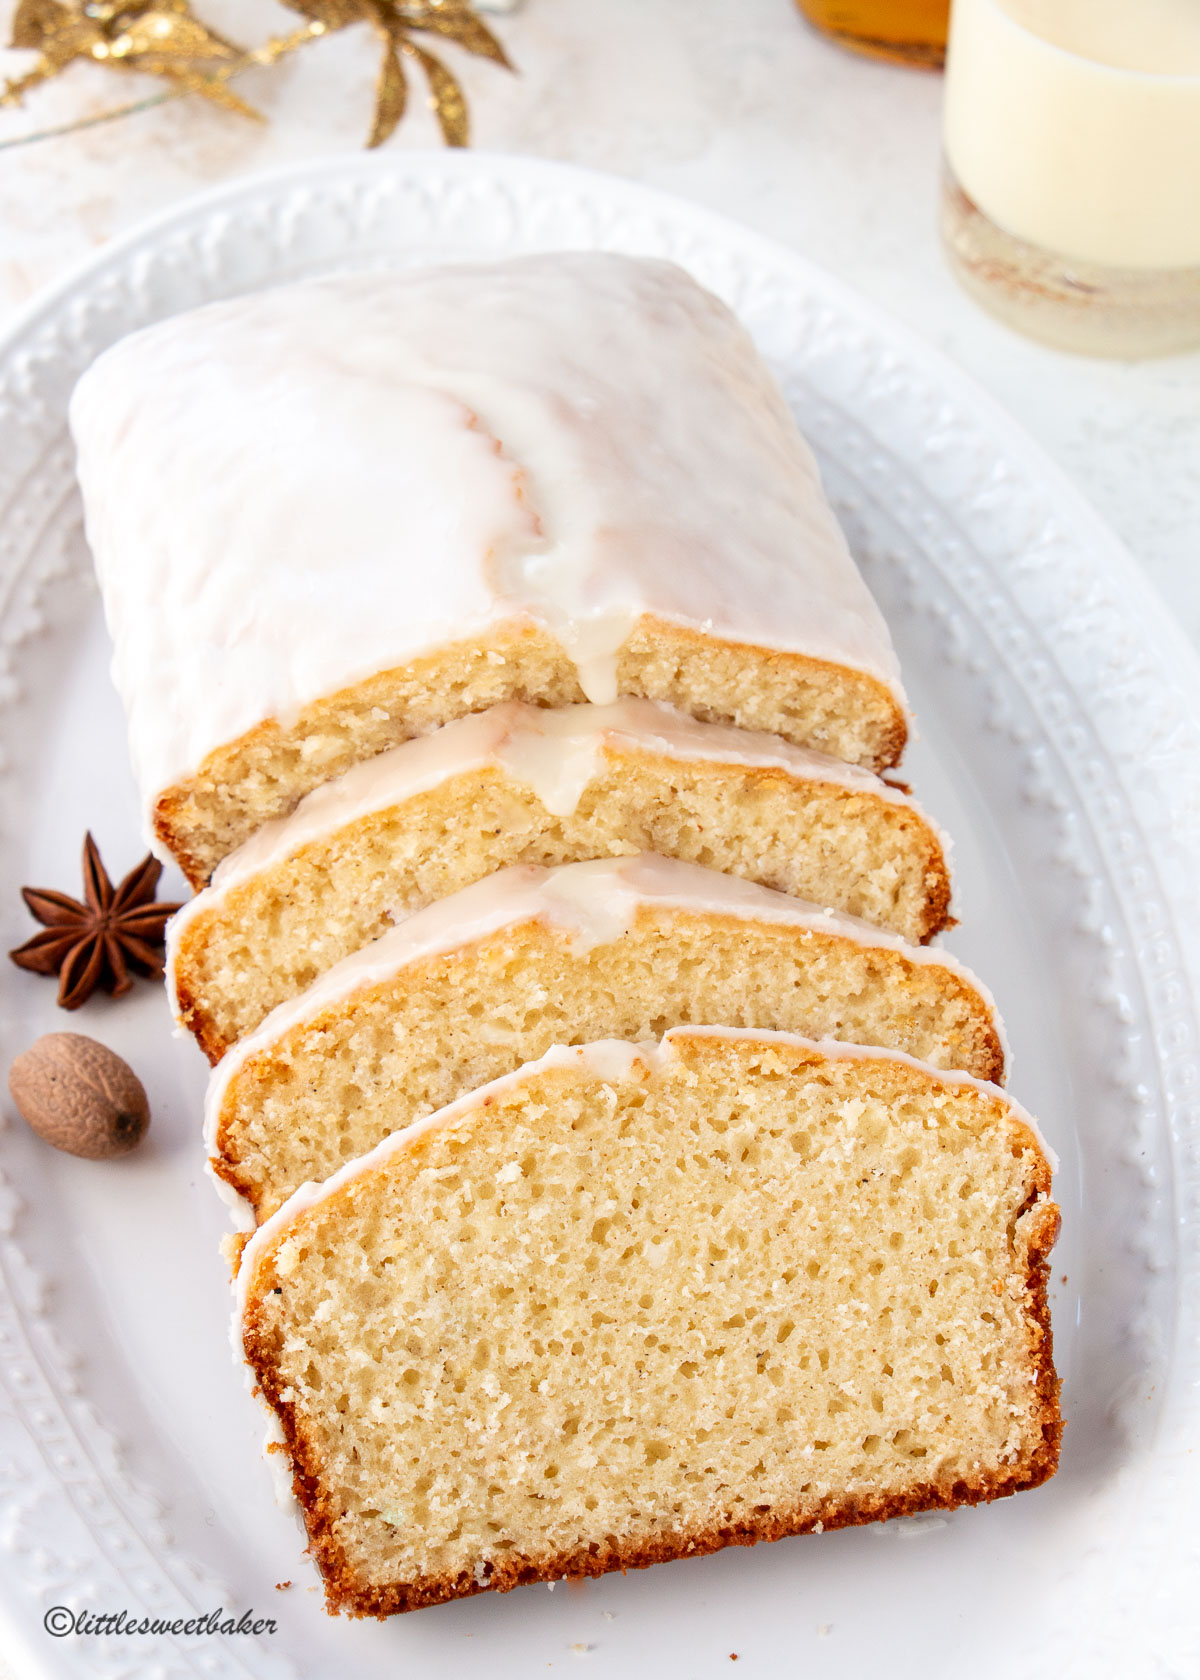 A loaf of glazed eggnog bread on a serving plate with a few cut slices.